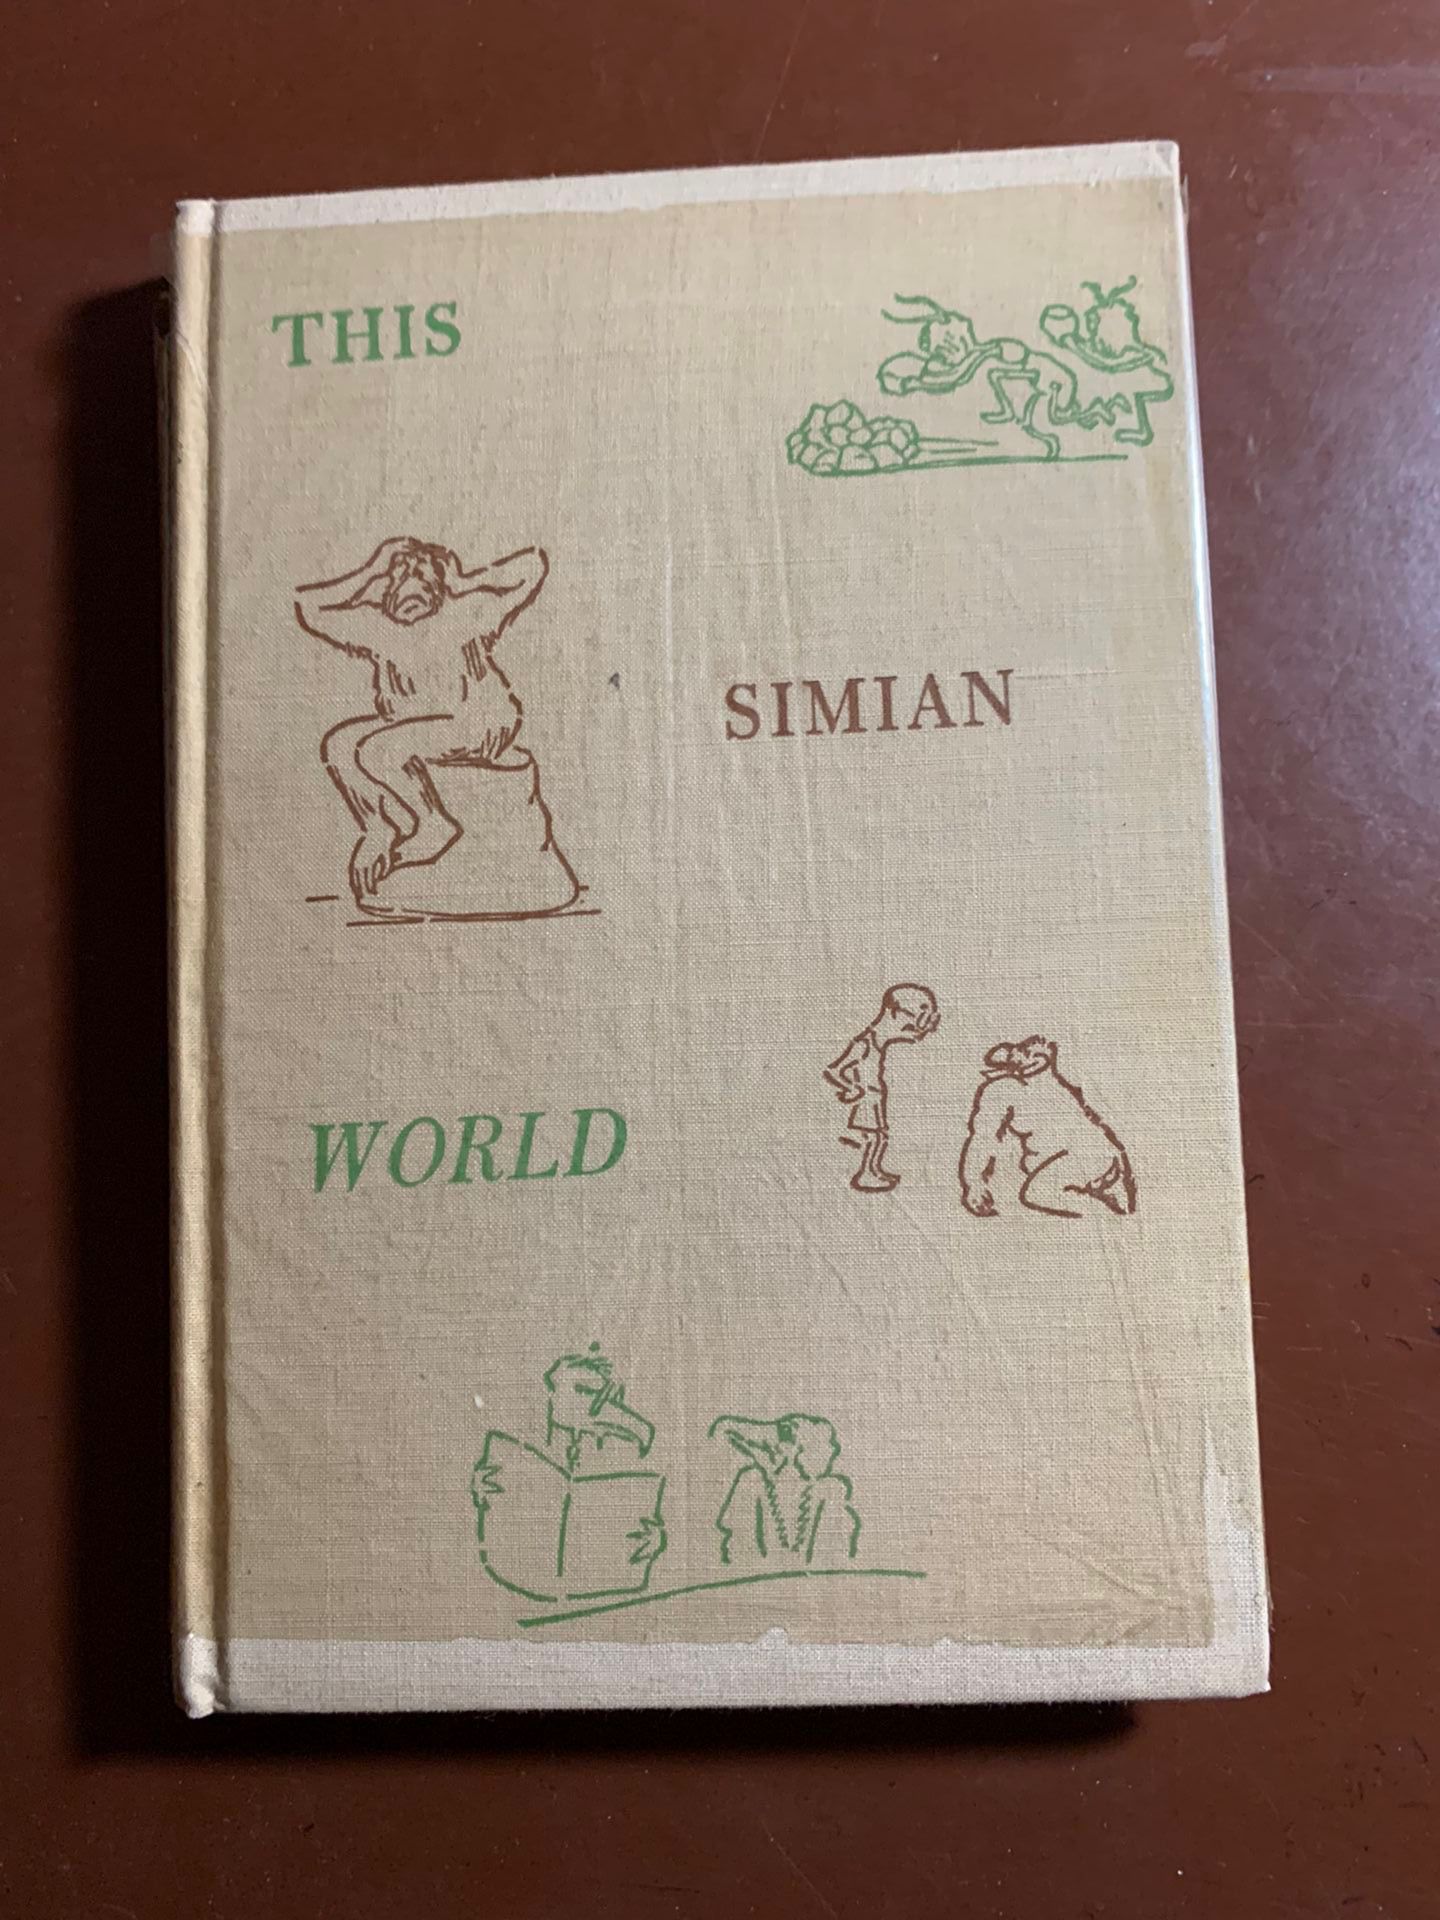 THIS SIMIAN WORLD by Clarence Day 1936.  BOOK IS IN PRISTINE CONDITION AND STILL HAS A PROTECTIVE CLEAR COVER PROVIDED BY PUBLISHER.